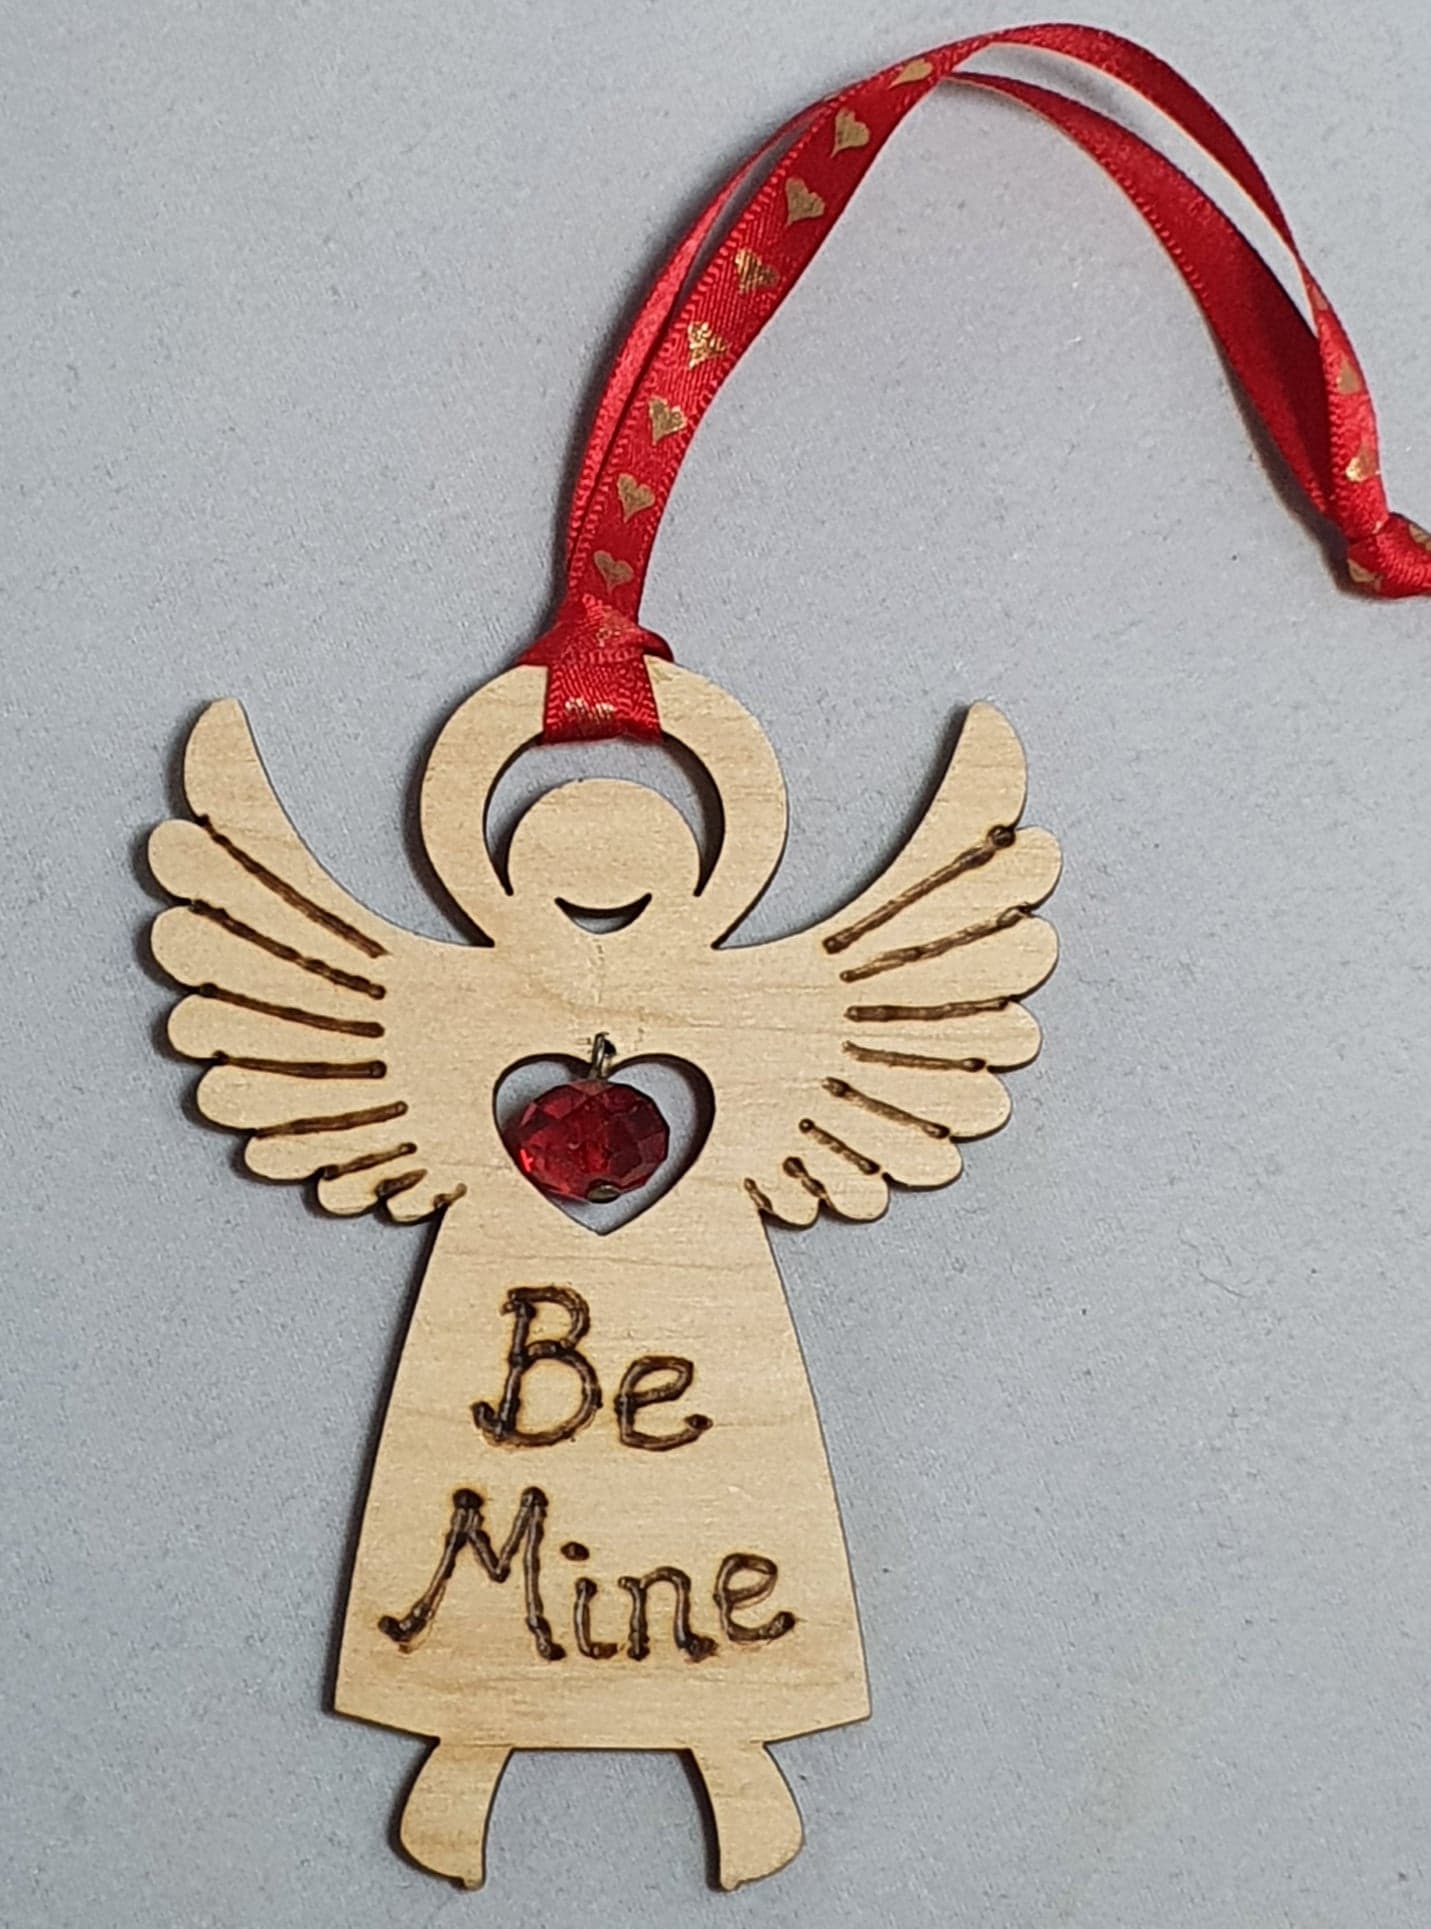 'Rustic Charm' Angel with words "Be Mine"